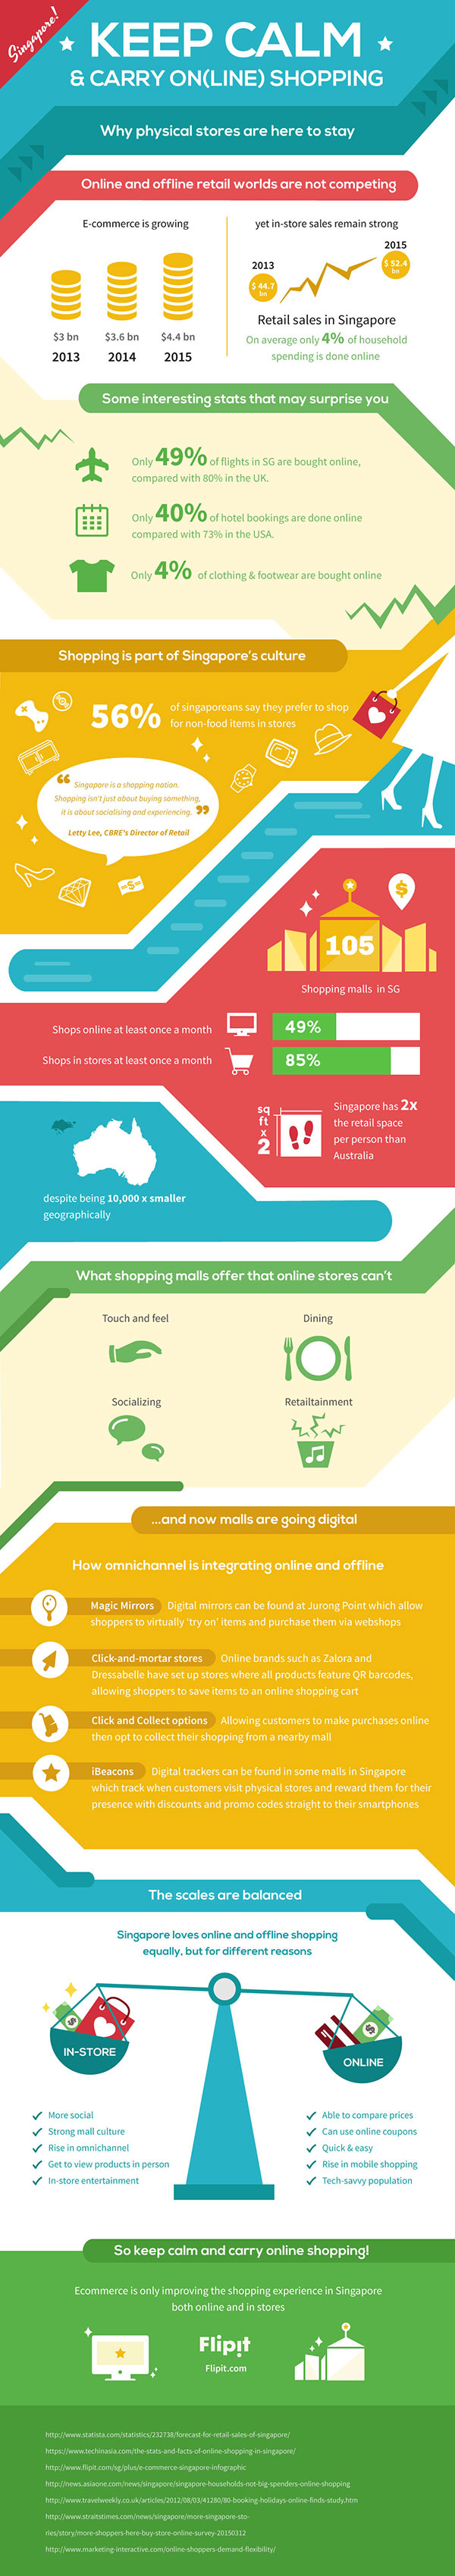 Infographic: online and offline shopping in Singapore